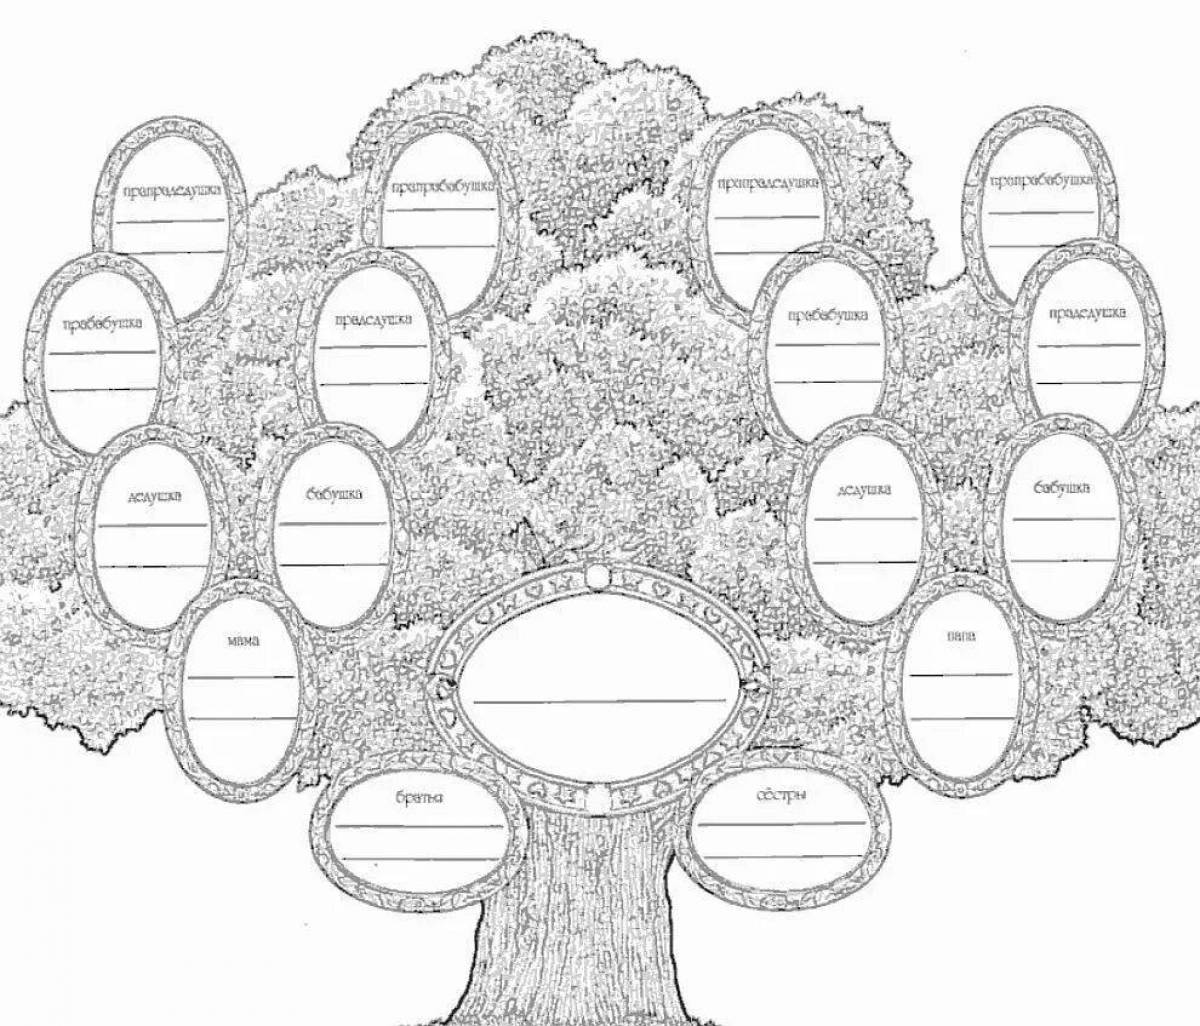 Coloring book dizzying family tree